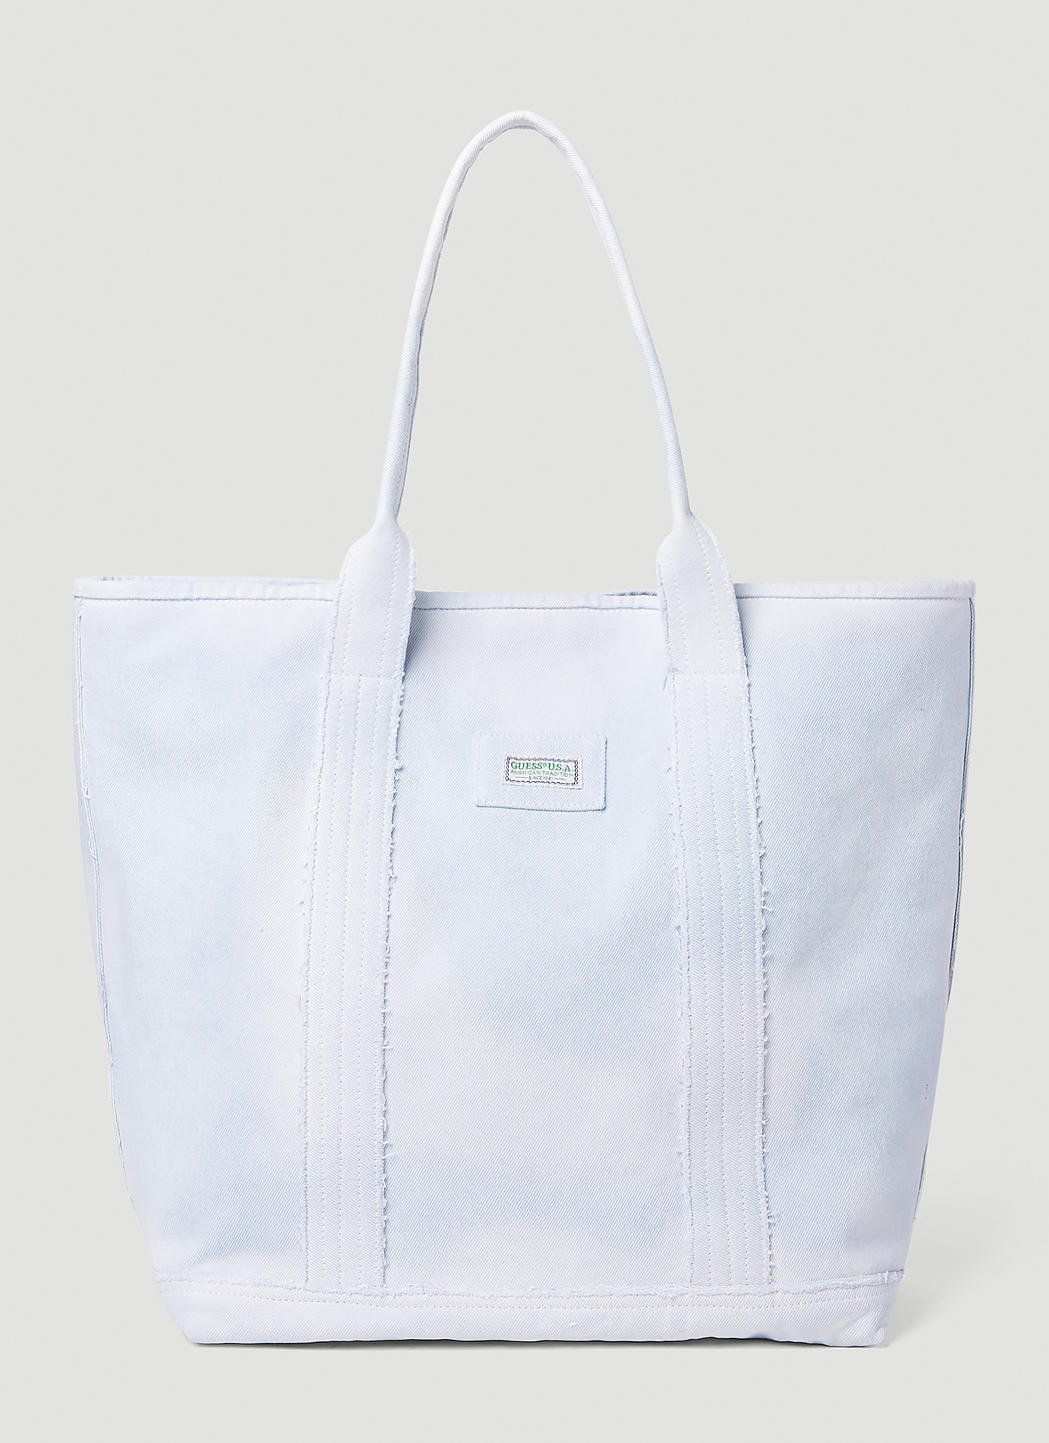 Guess USA Tote in Light | LN-CC®